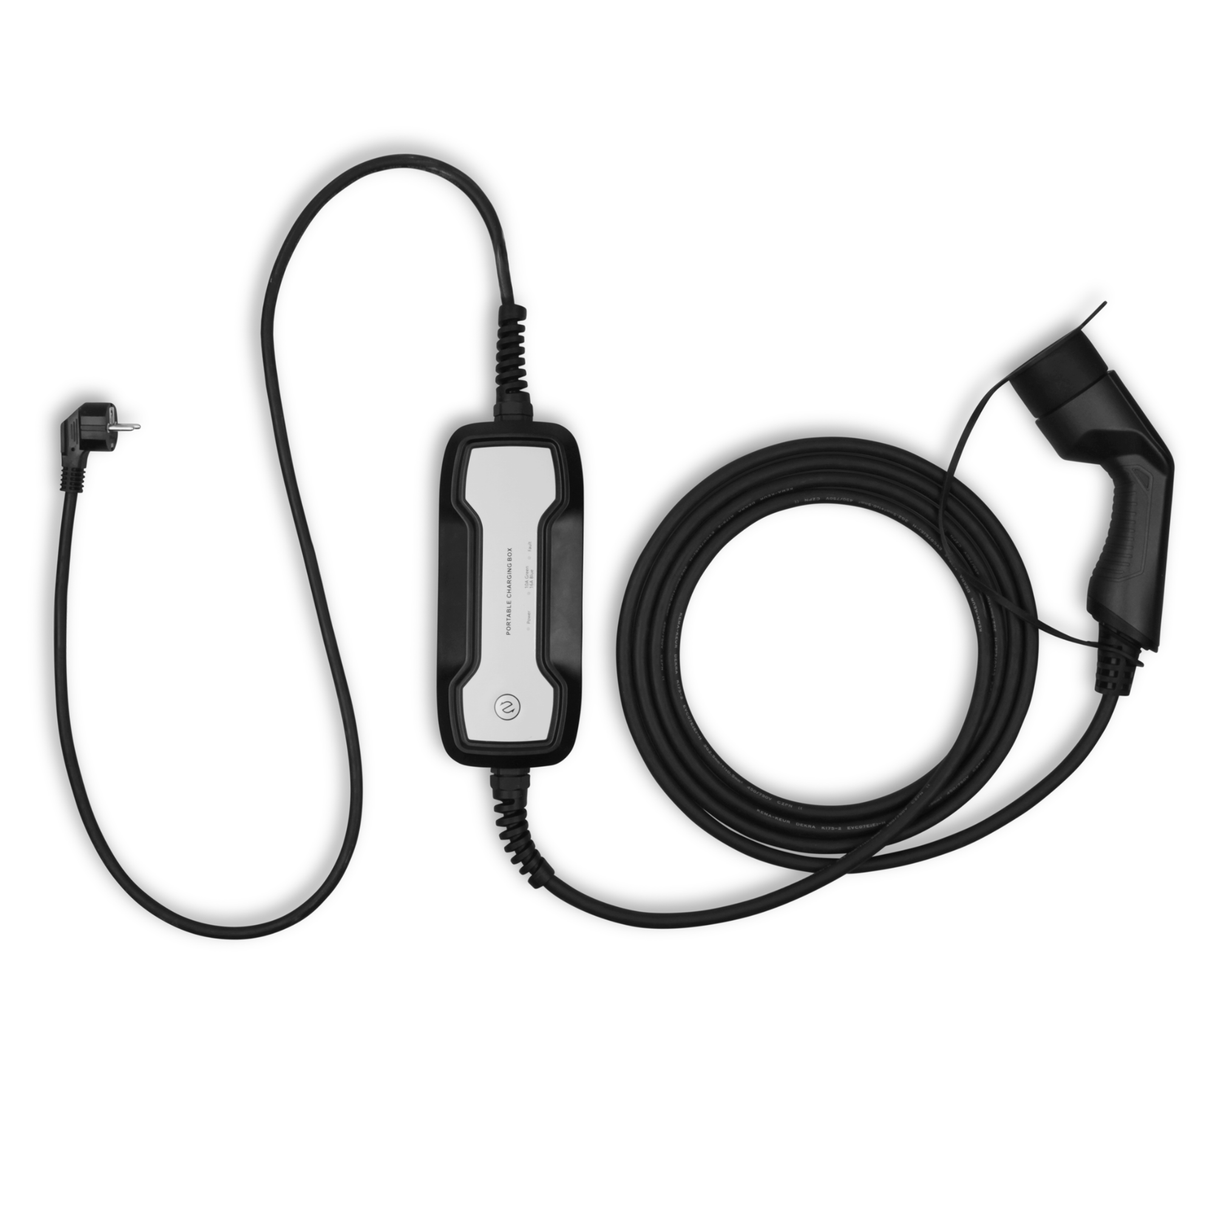 Mobile charger Jac iev7s - Besen - Type 2 to Schuko